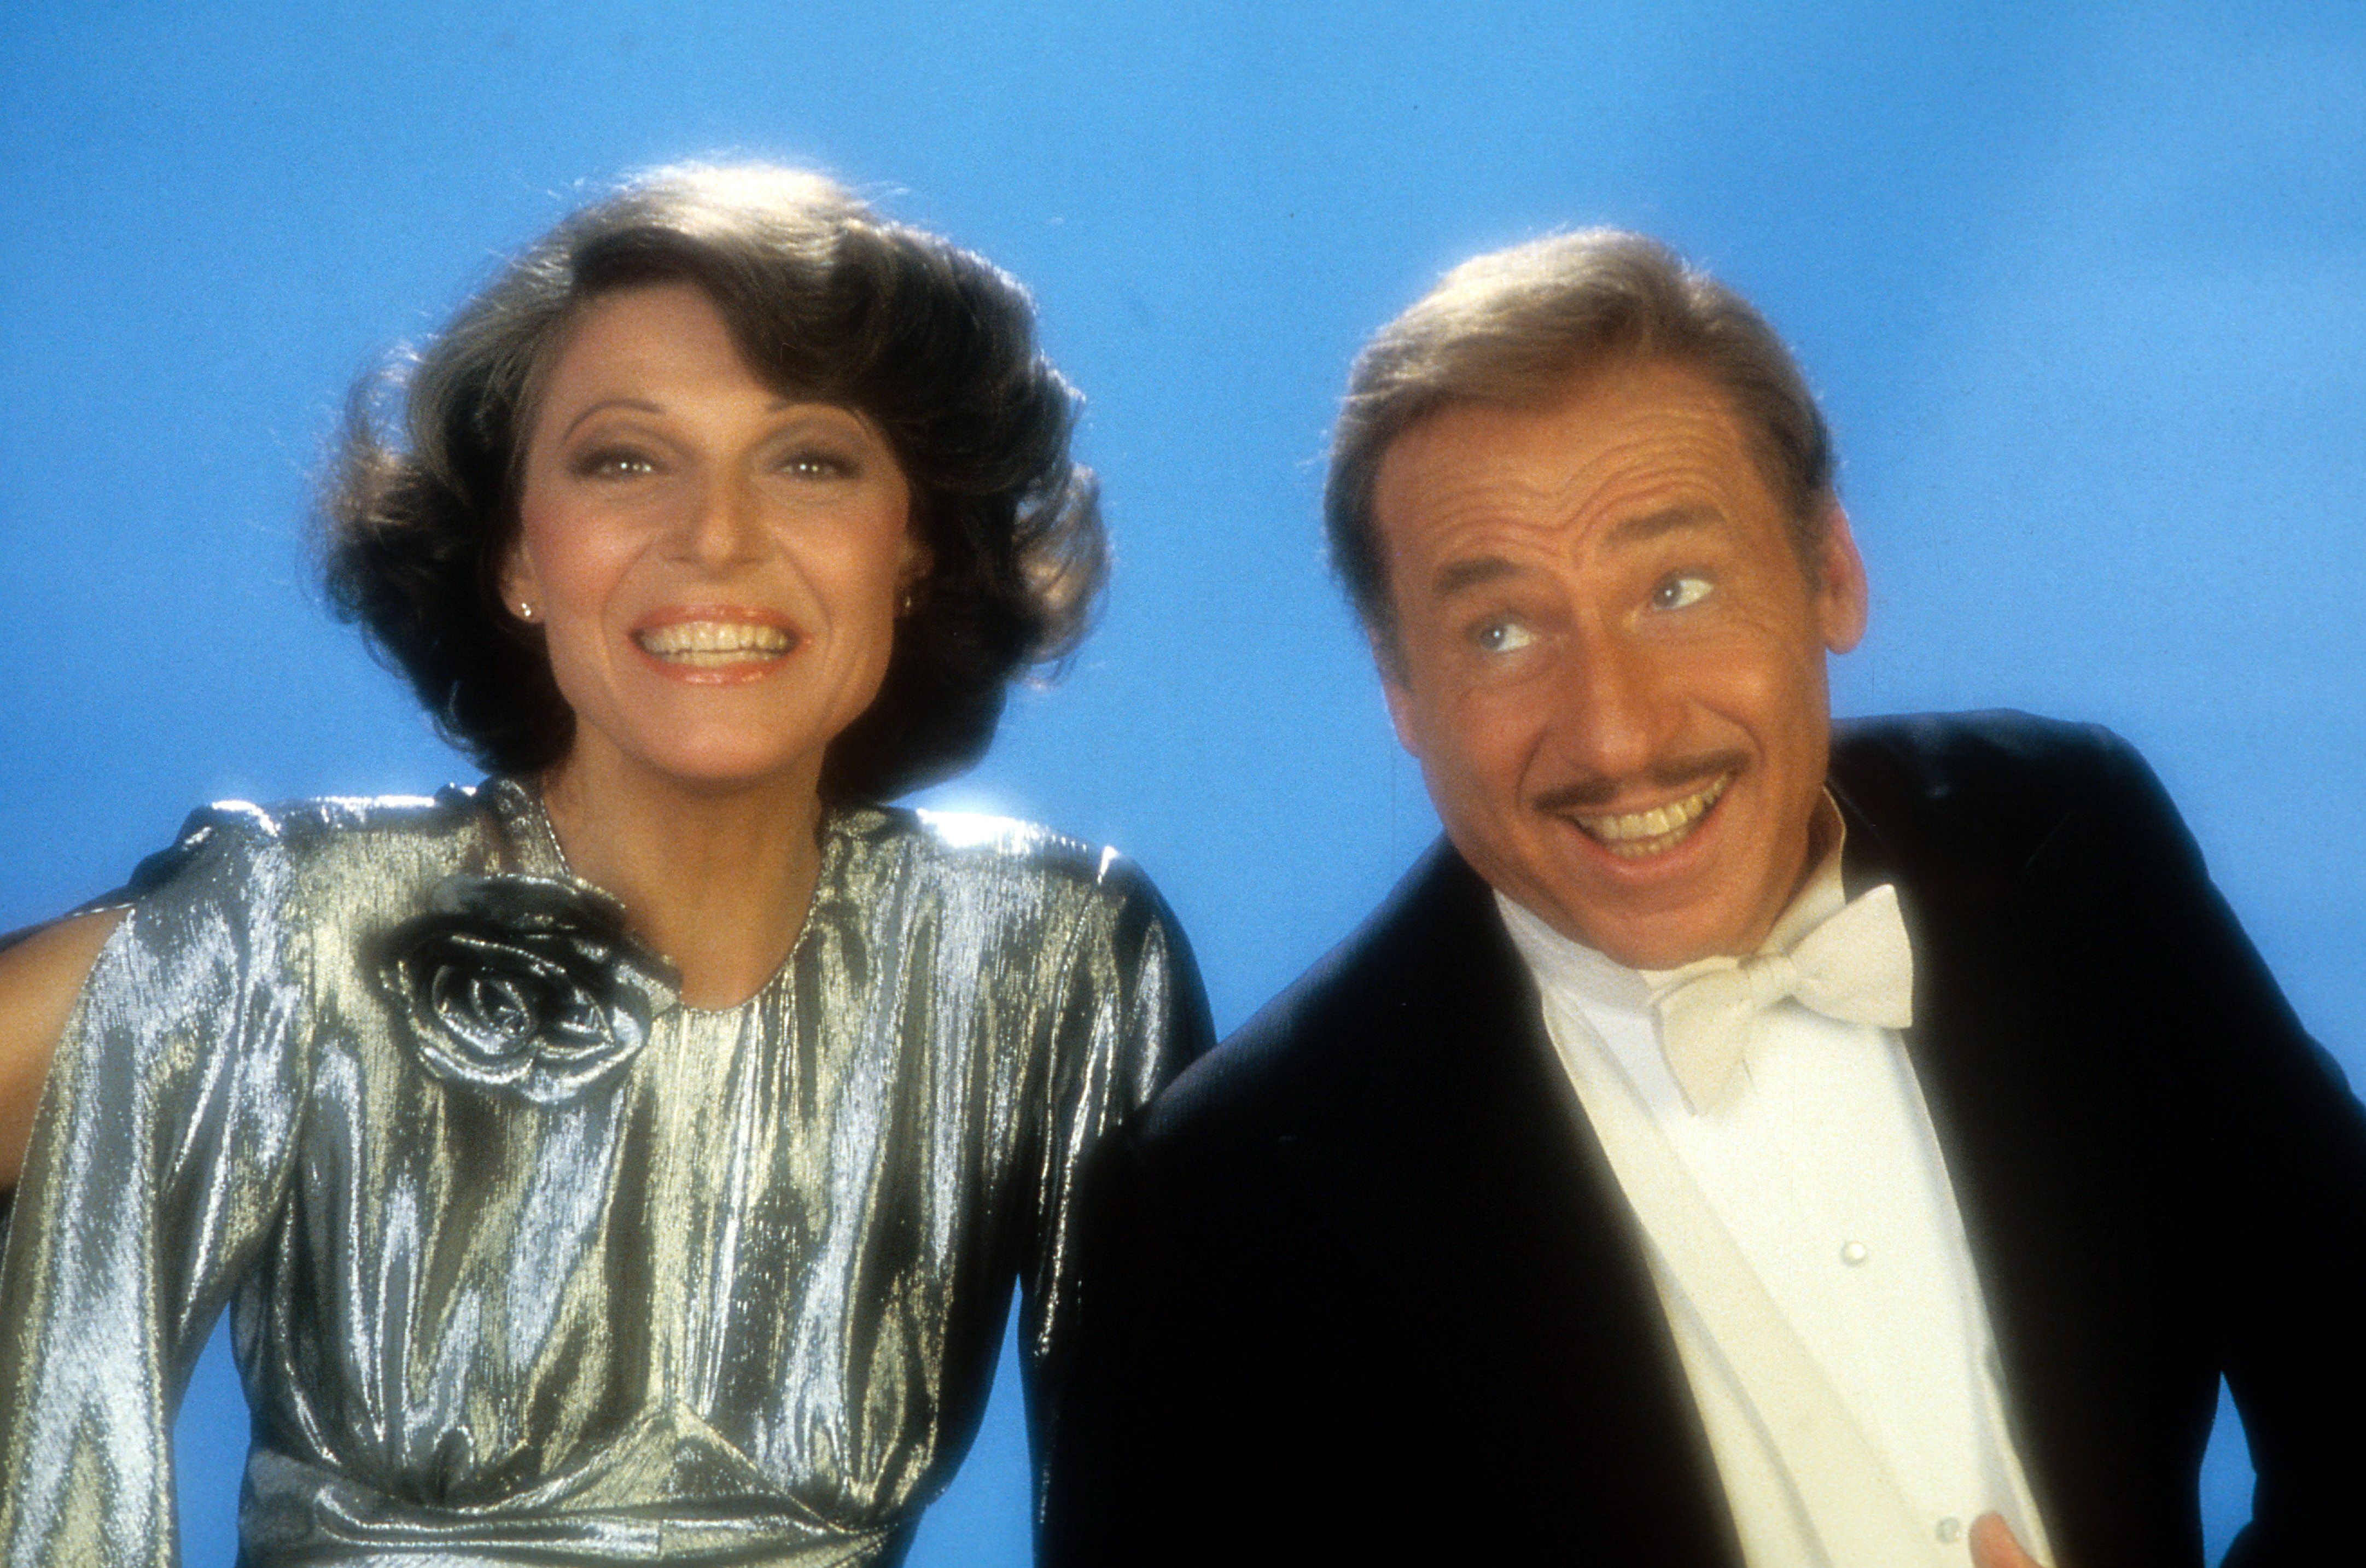 Anne Bancroft and Mel Brooks smile for a publicity photo in 1983. | Source: Getty Images